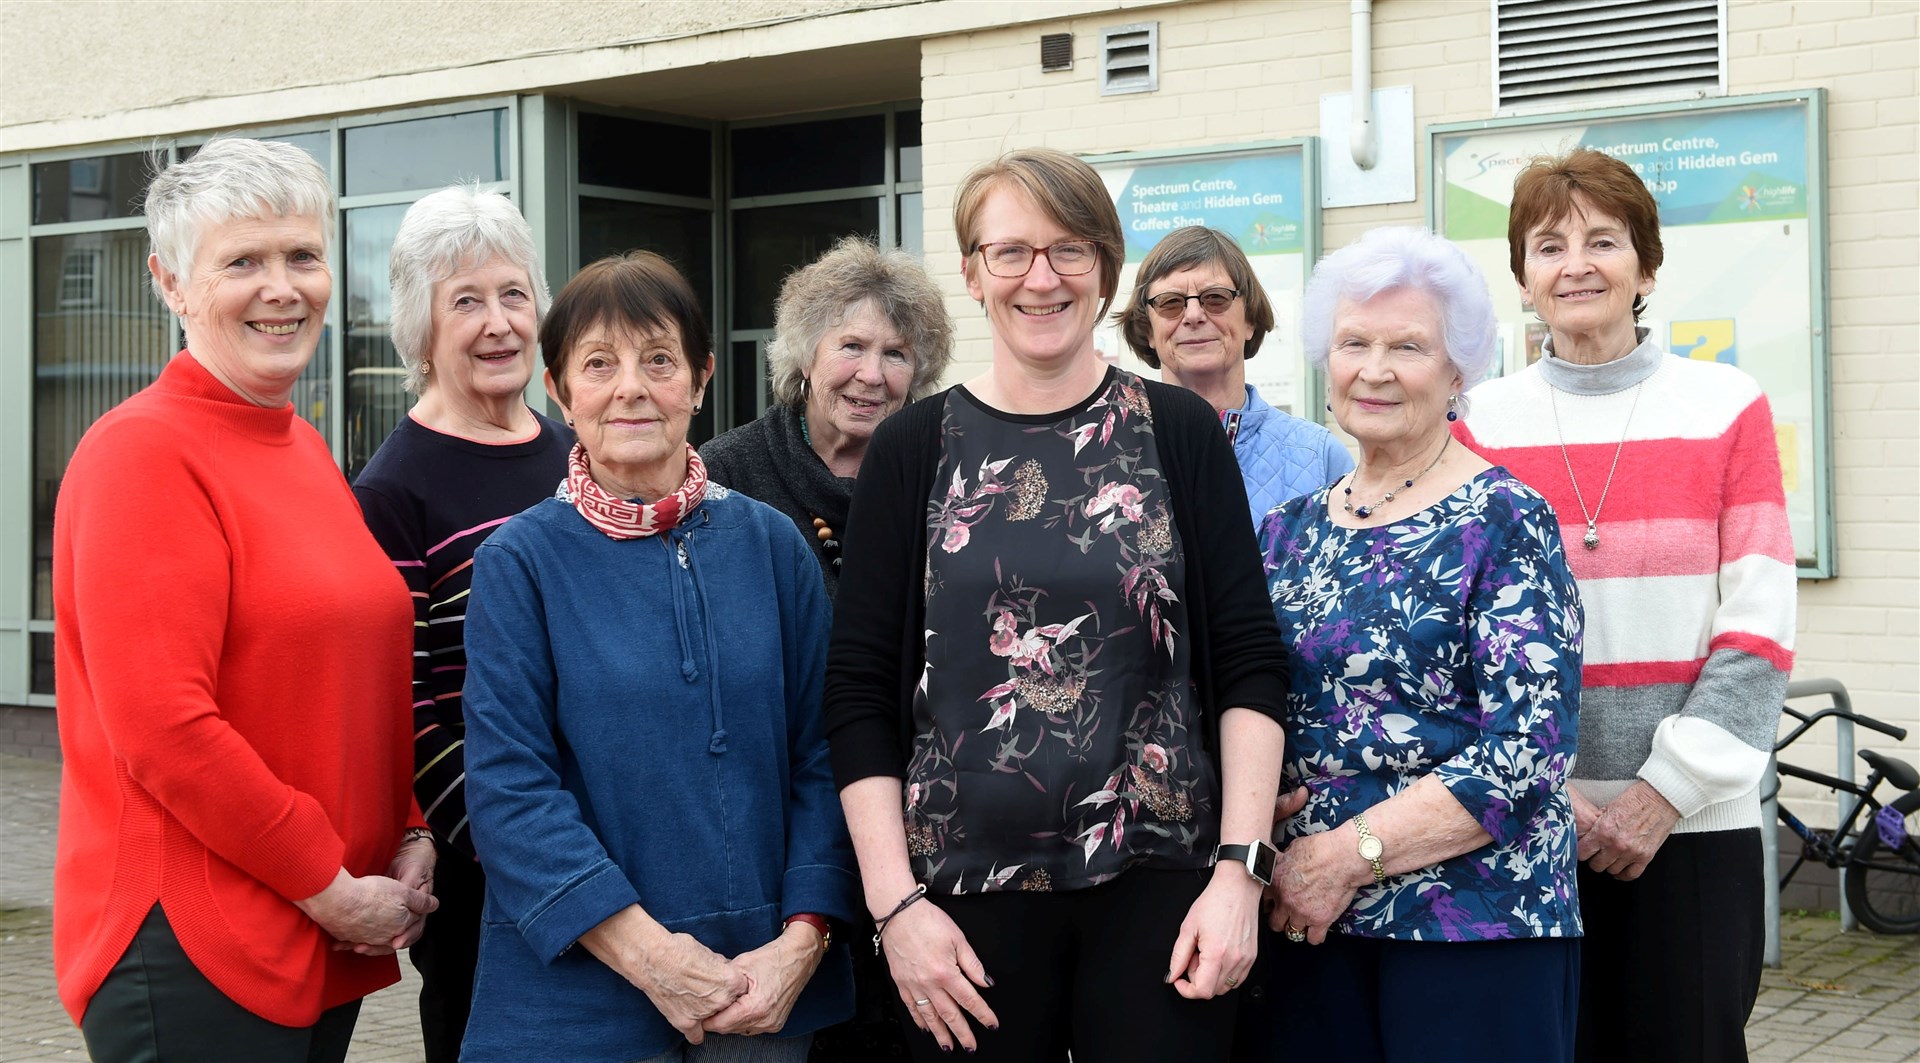 Donna Smith, of Mikeysline, collects a cheque from Silver Belles Kathleen Budge, Sine Mackinnon, Jean Campbell, Barbara Mchardy, Donna Smith, Margot Tuley, Margaret Laing and Moira Henderson.